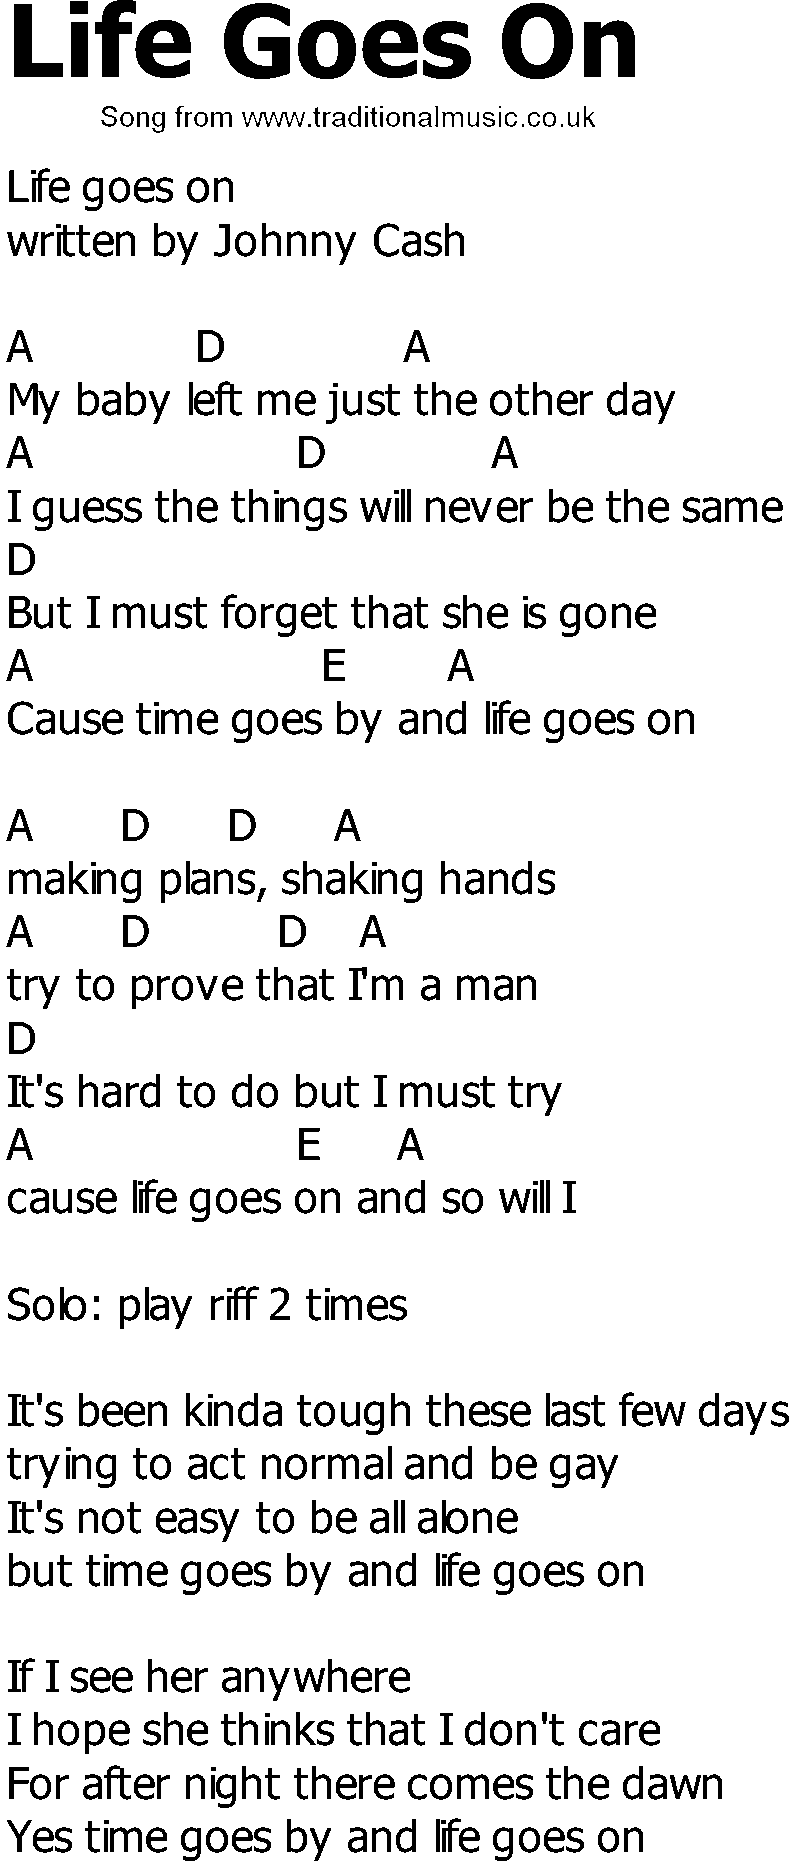 Old Country song lyrics with chords - Life Goes On